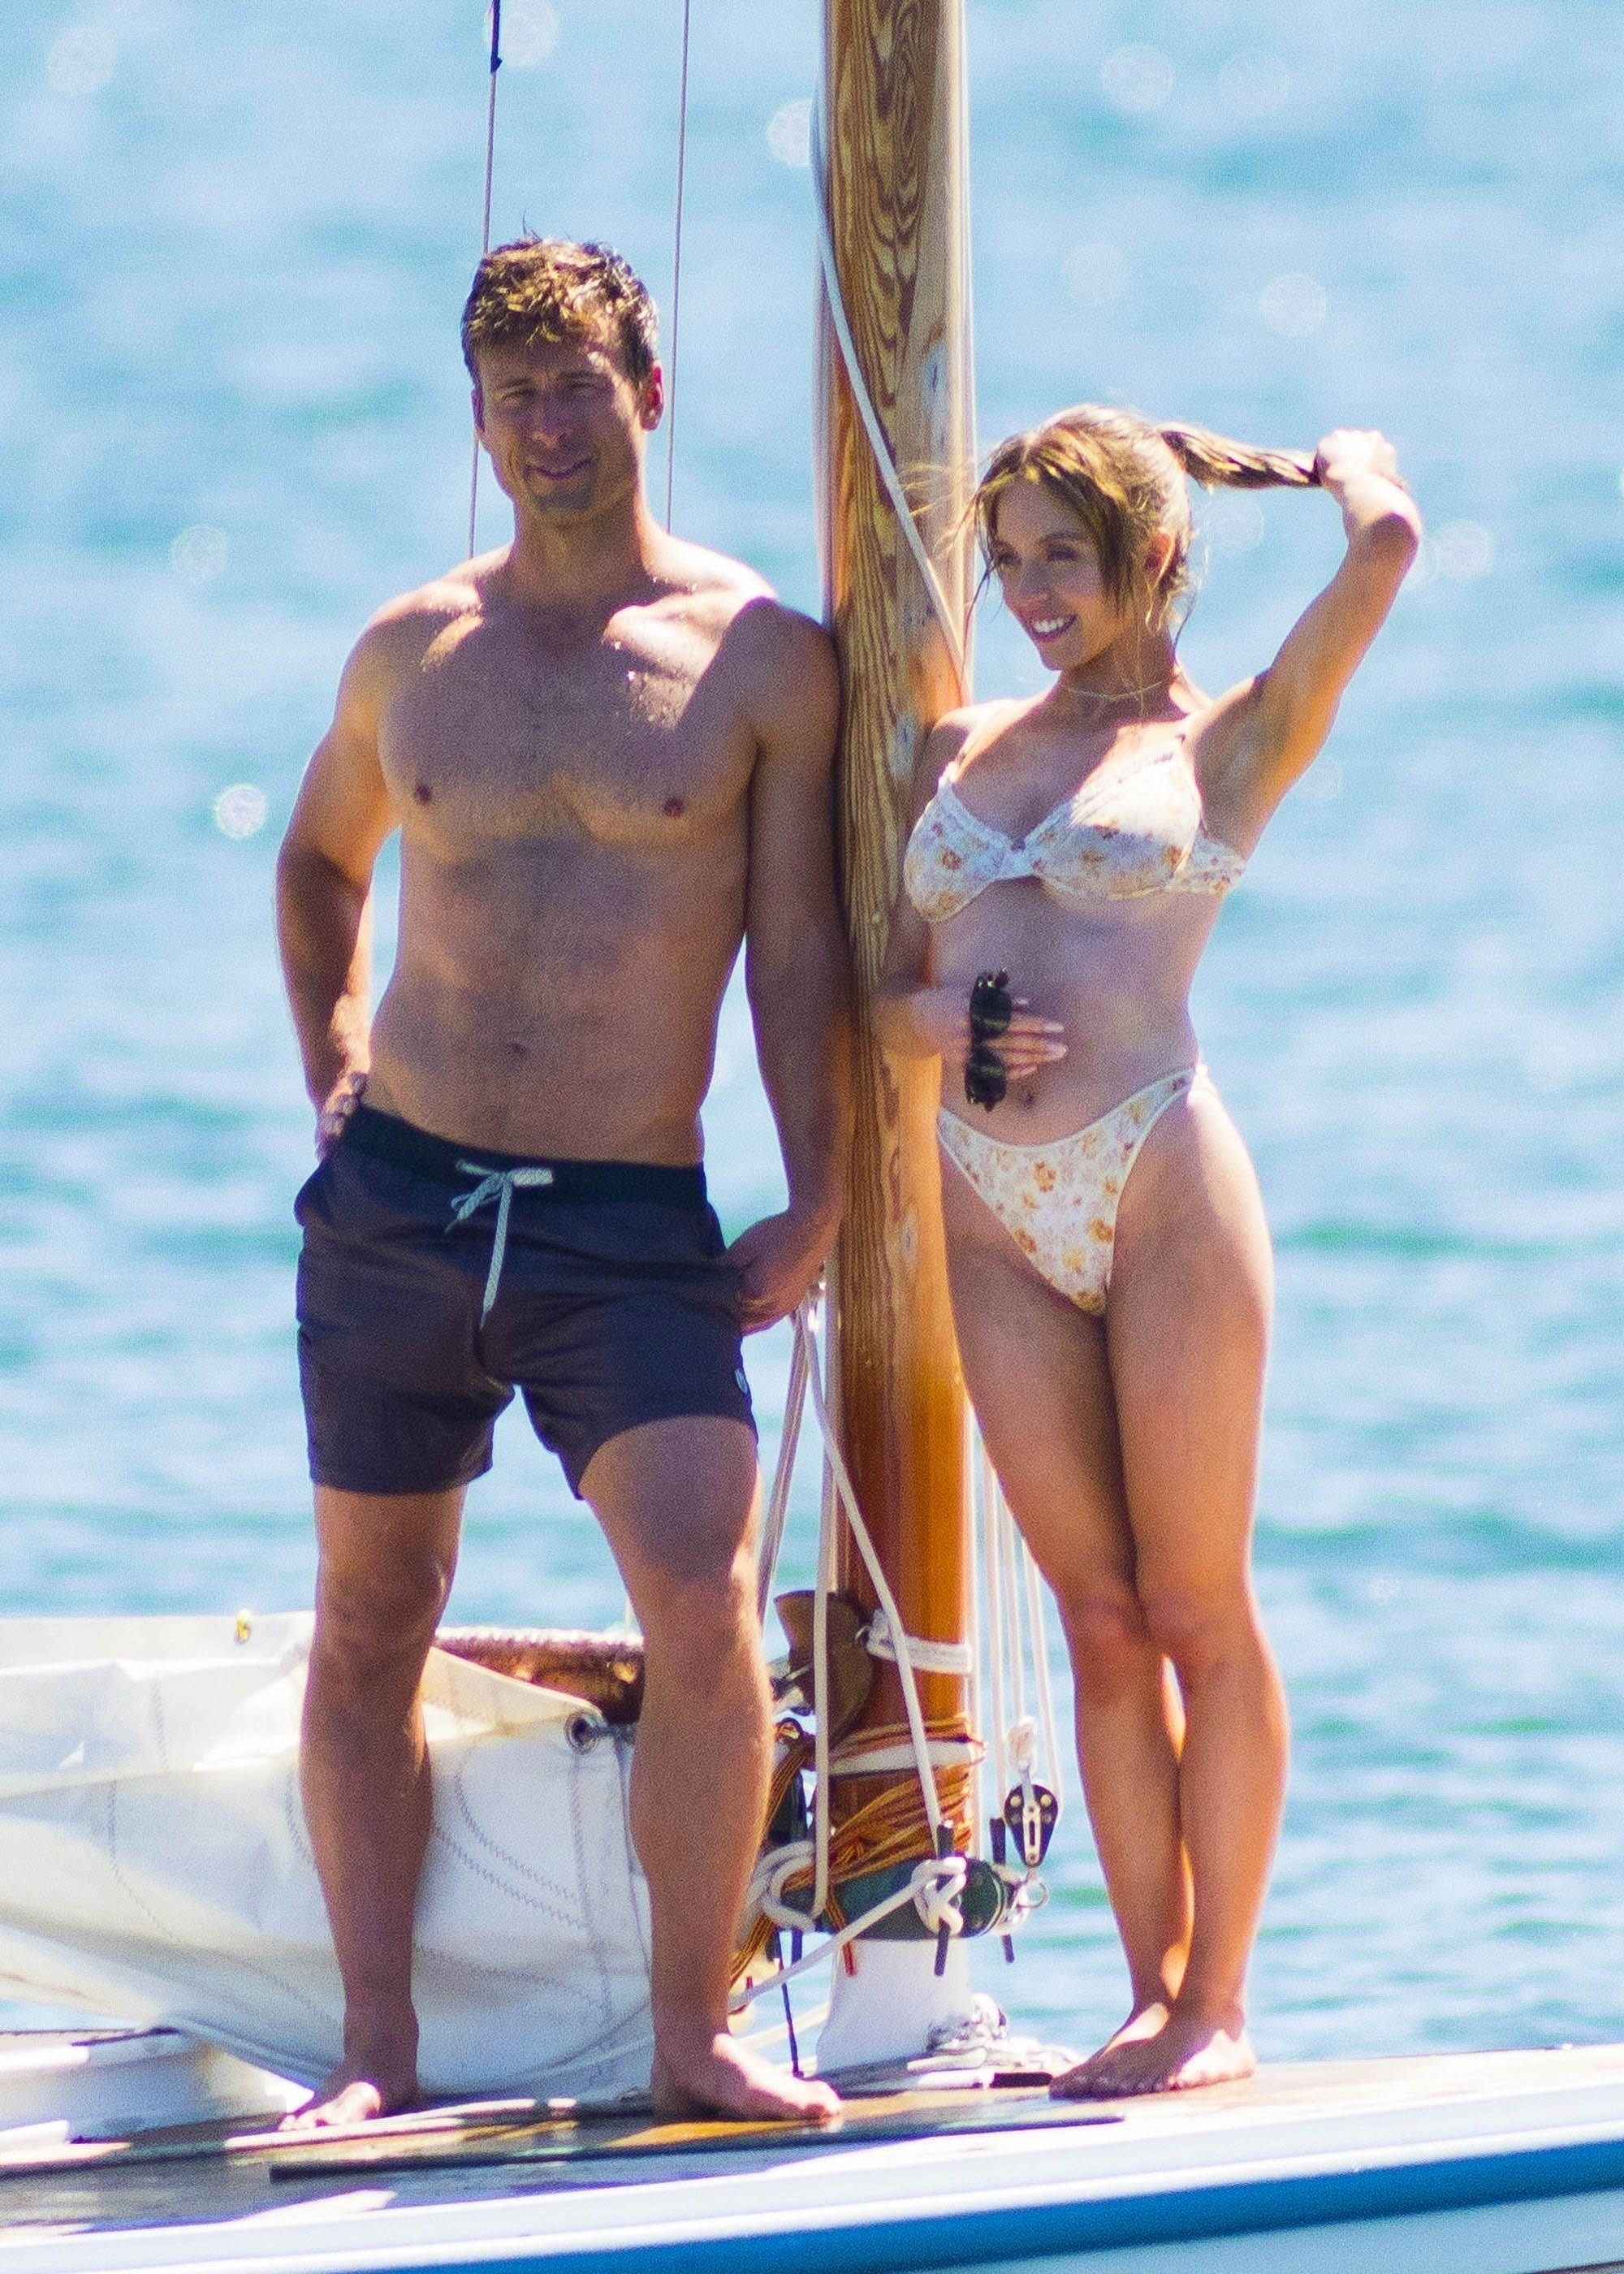 Sydney Sweeney and Glen Powell Strip Down to Swimsuits for Rom-Com